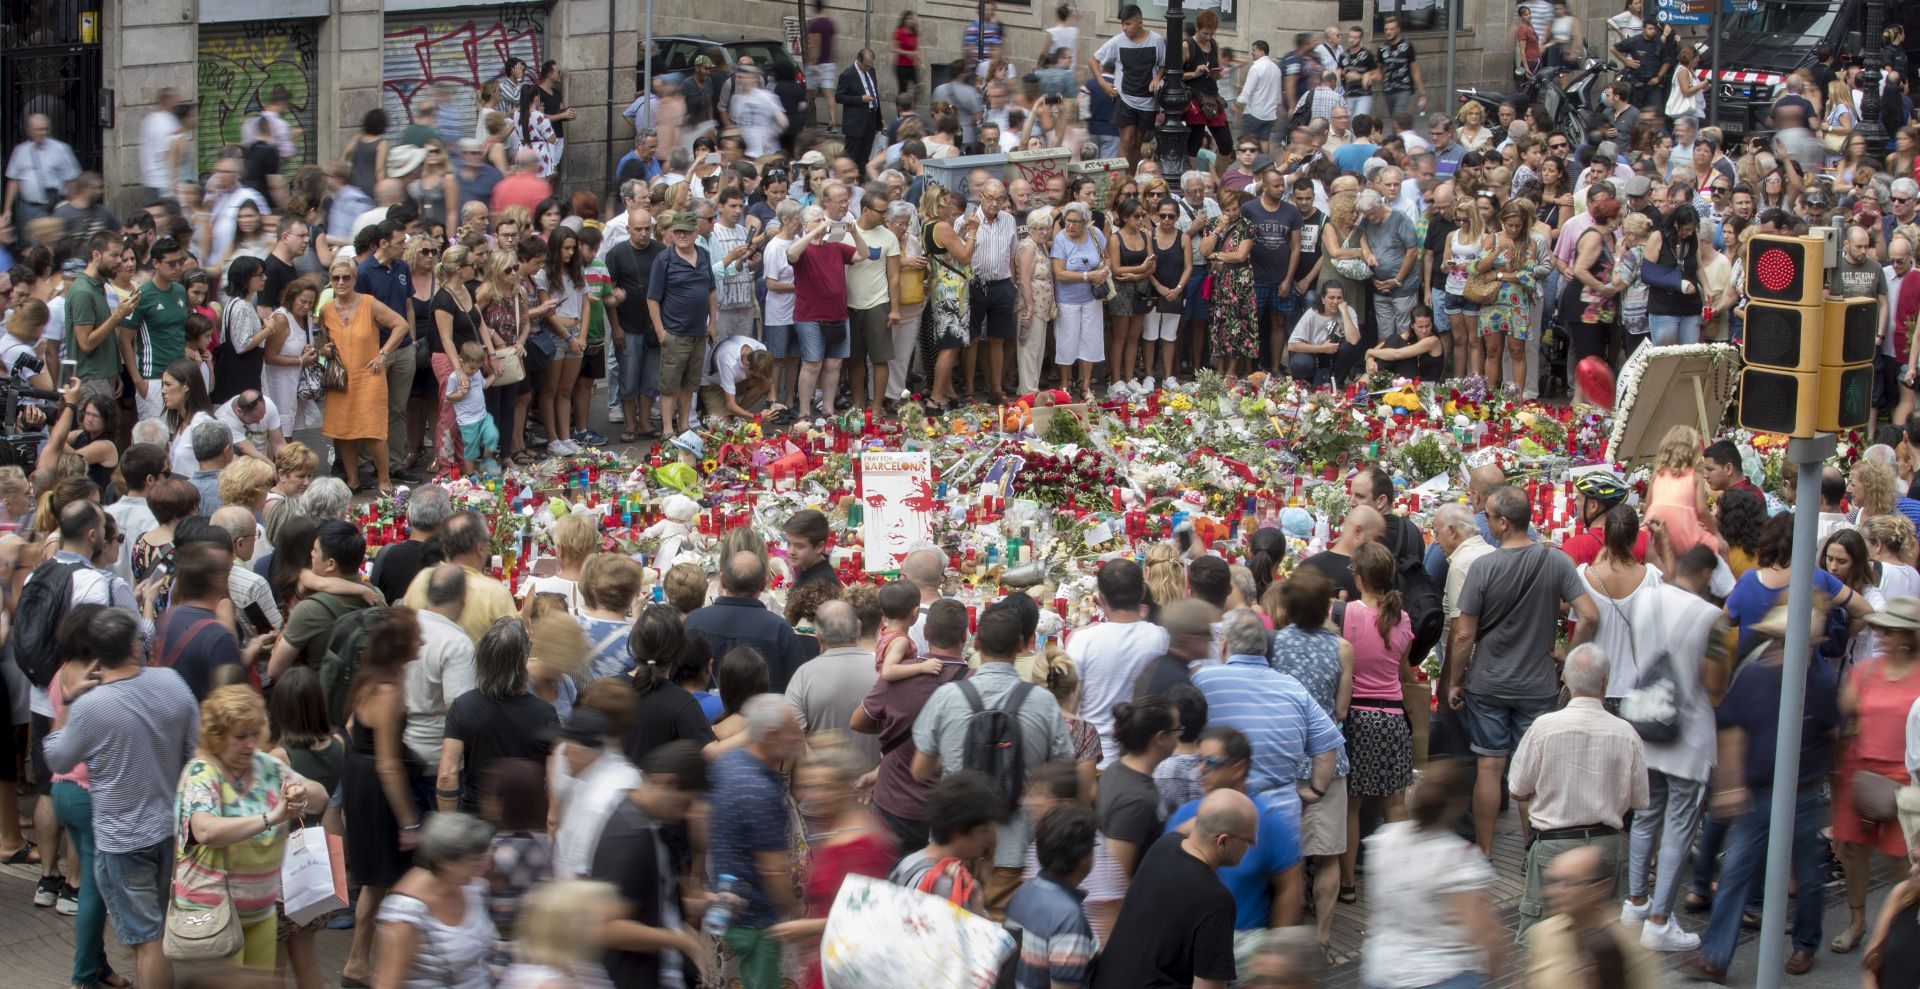 epa06152944 People pay their respect to the victims outside the Liceu Theatre, on the site of a deadly van attack in Barcelona, Spain, 20 August 2017. At least 14 people were killed and some 130 others injured after cars crashed into pedestrians on the La Rambla boulevard in Barcelona and on a promenade in the coastal city of Cambrils on 17 August. Spanish police have stated that the attacks in Barcelona and in Cambrils were linked. The so-called 'Islamic State' (IS) in the meantime has claimed responsibility for the attacks in Barcelona and Cambrils. Spanish police are still hunting for the driver of a van who perpetrated the deadly attack in Barcelona.  EPA/MARTA PEREZ